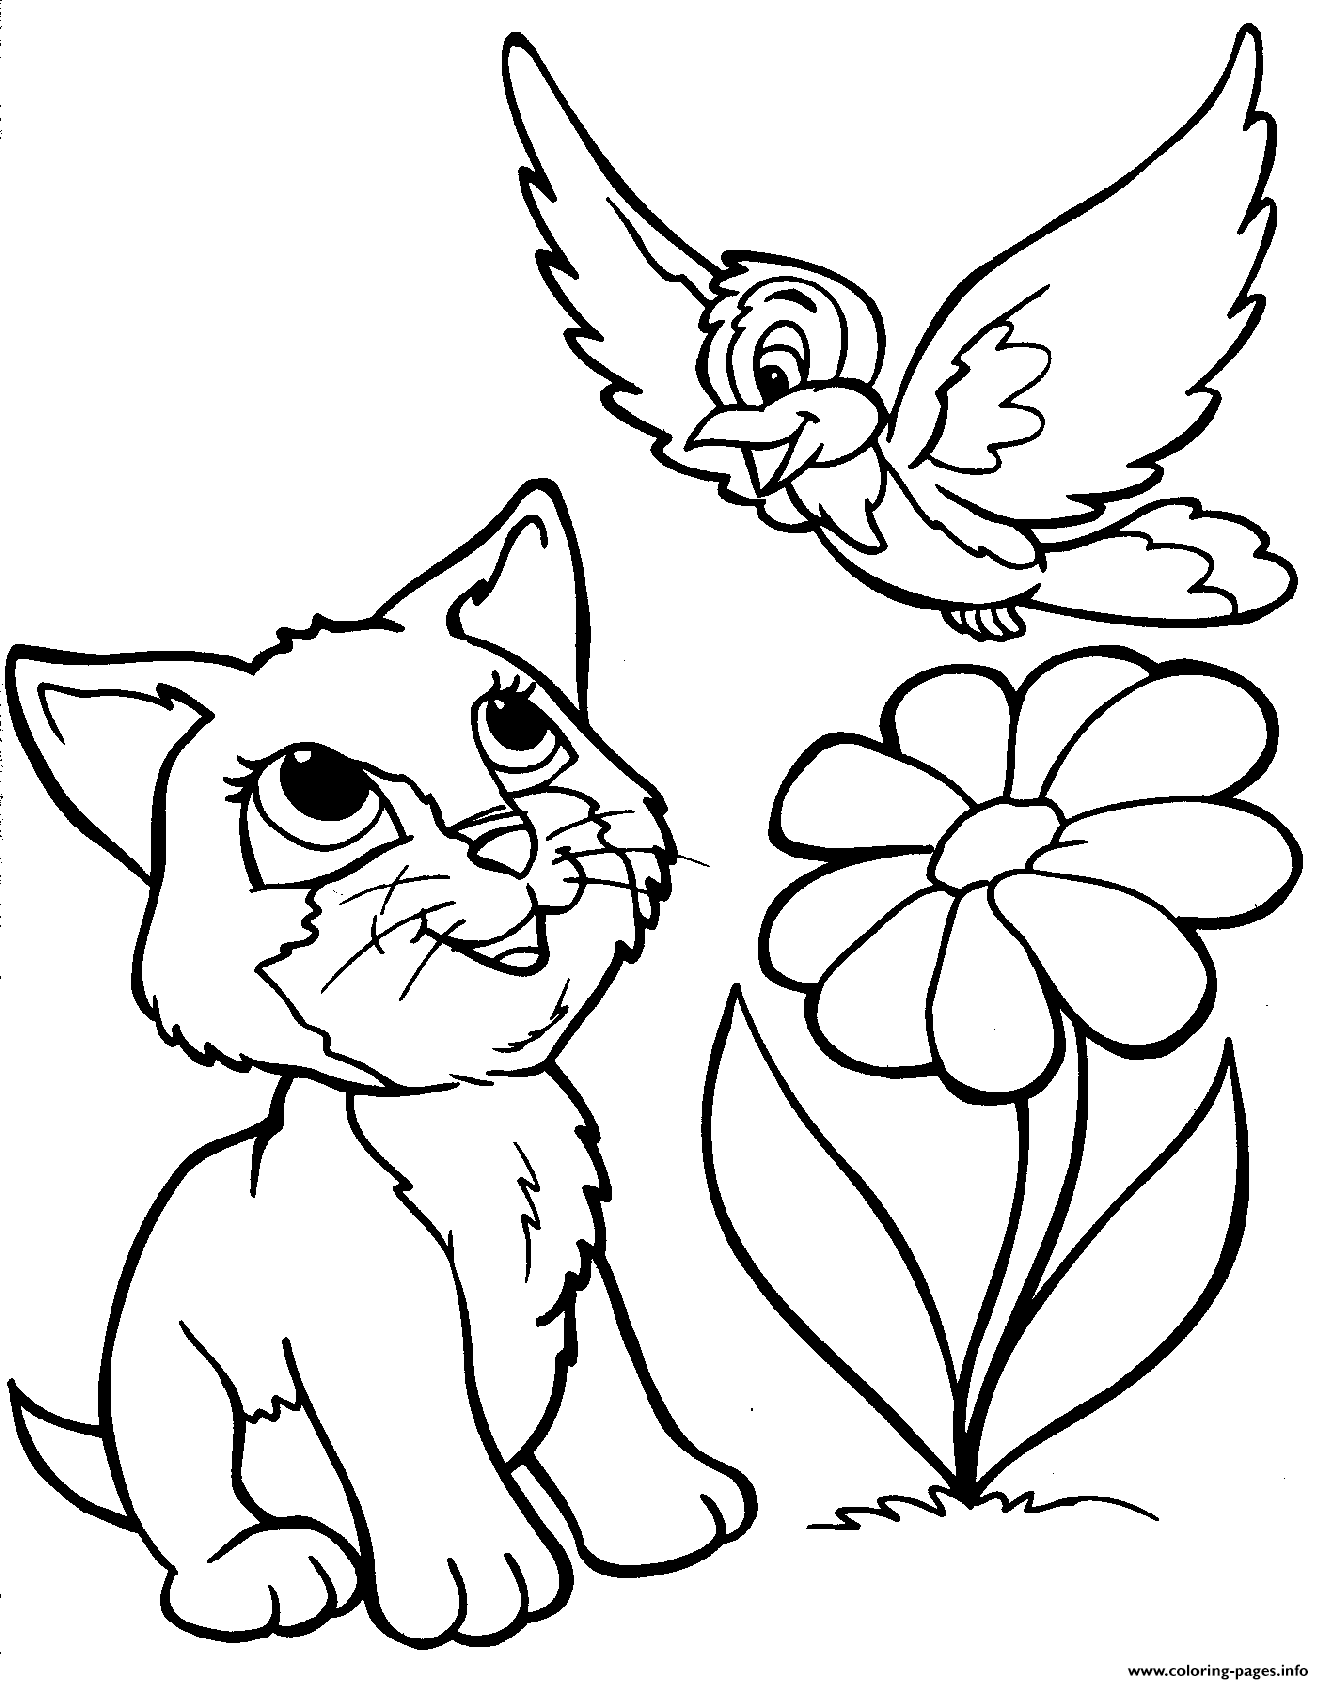 Bird And A Cat Df27 coloring